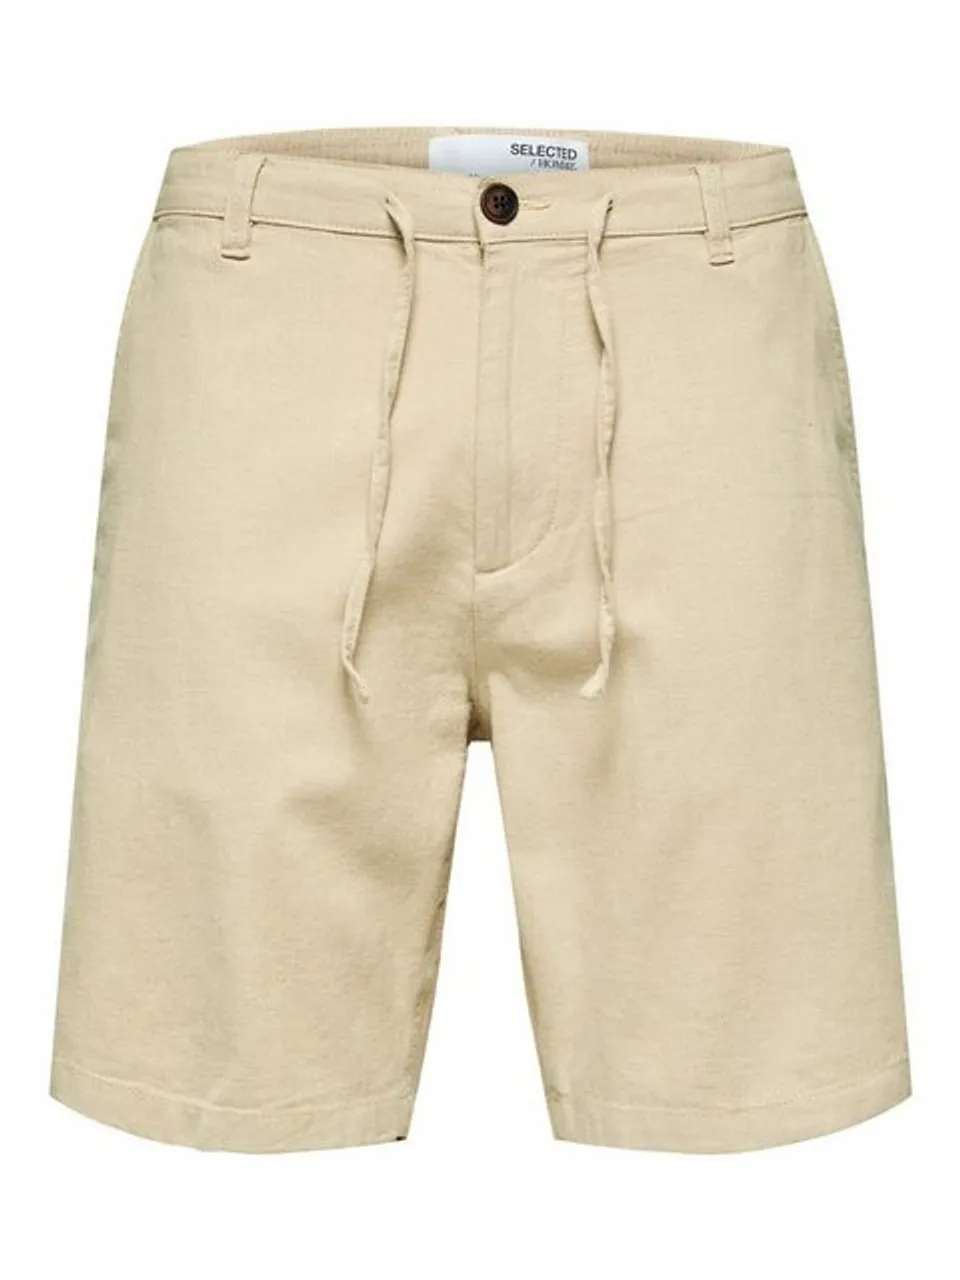 SELECTED HOMME Shorts SLHCOMFORT-BRODY LINEN mit Stretch